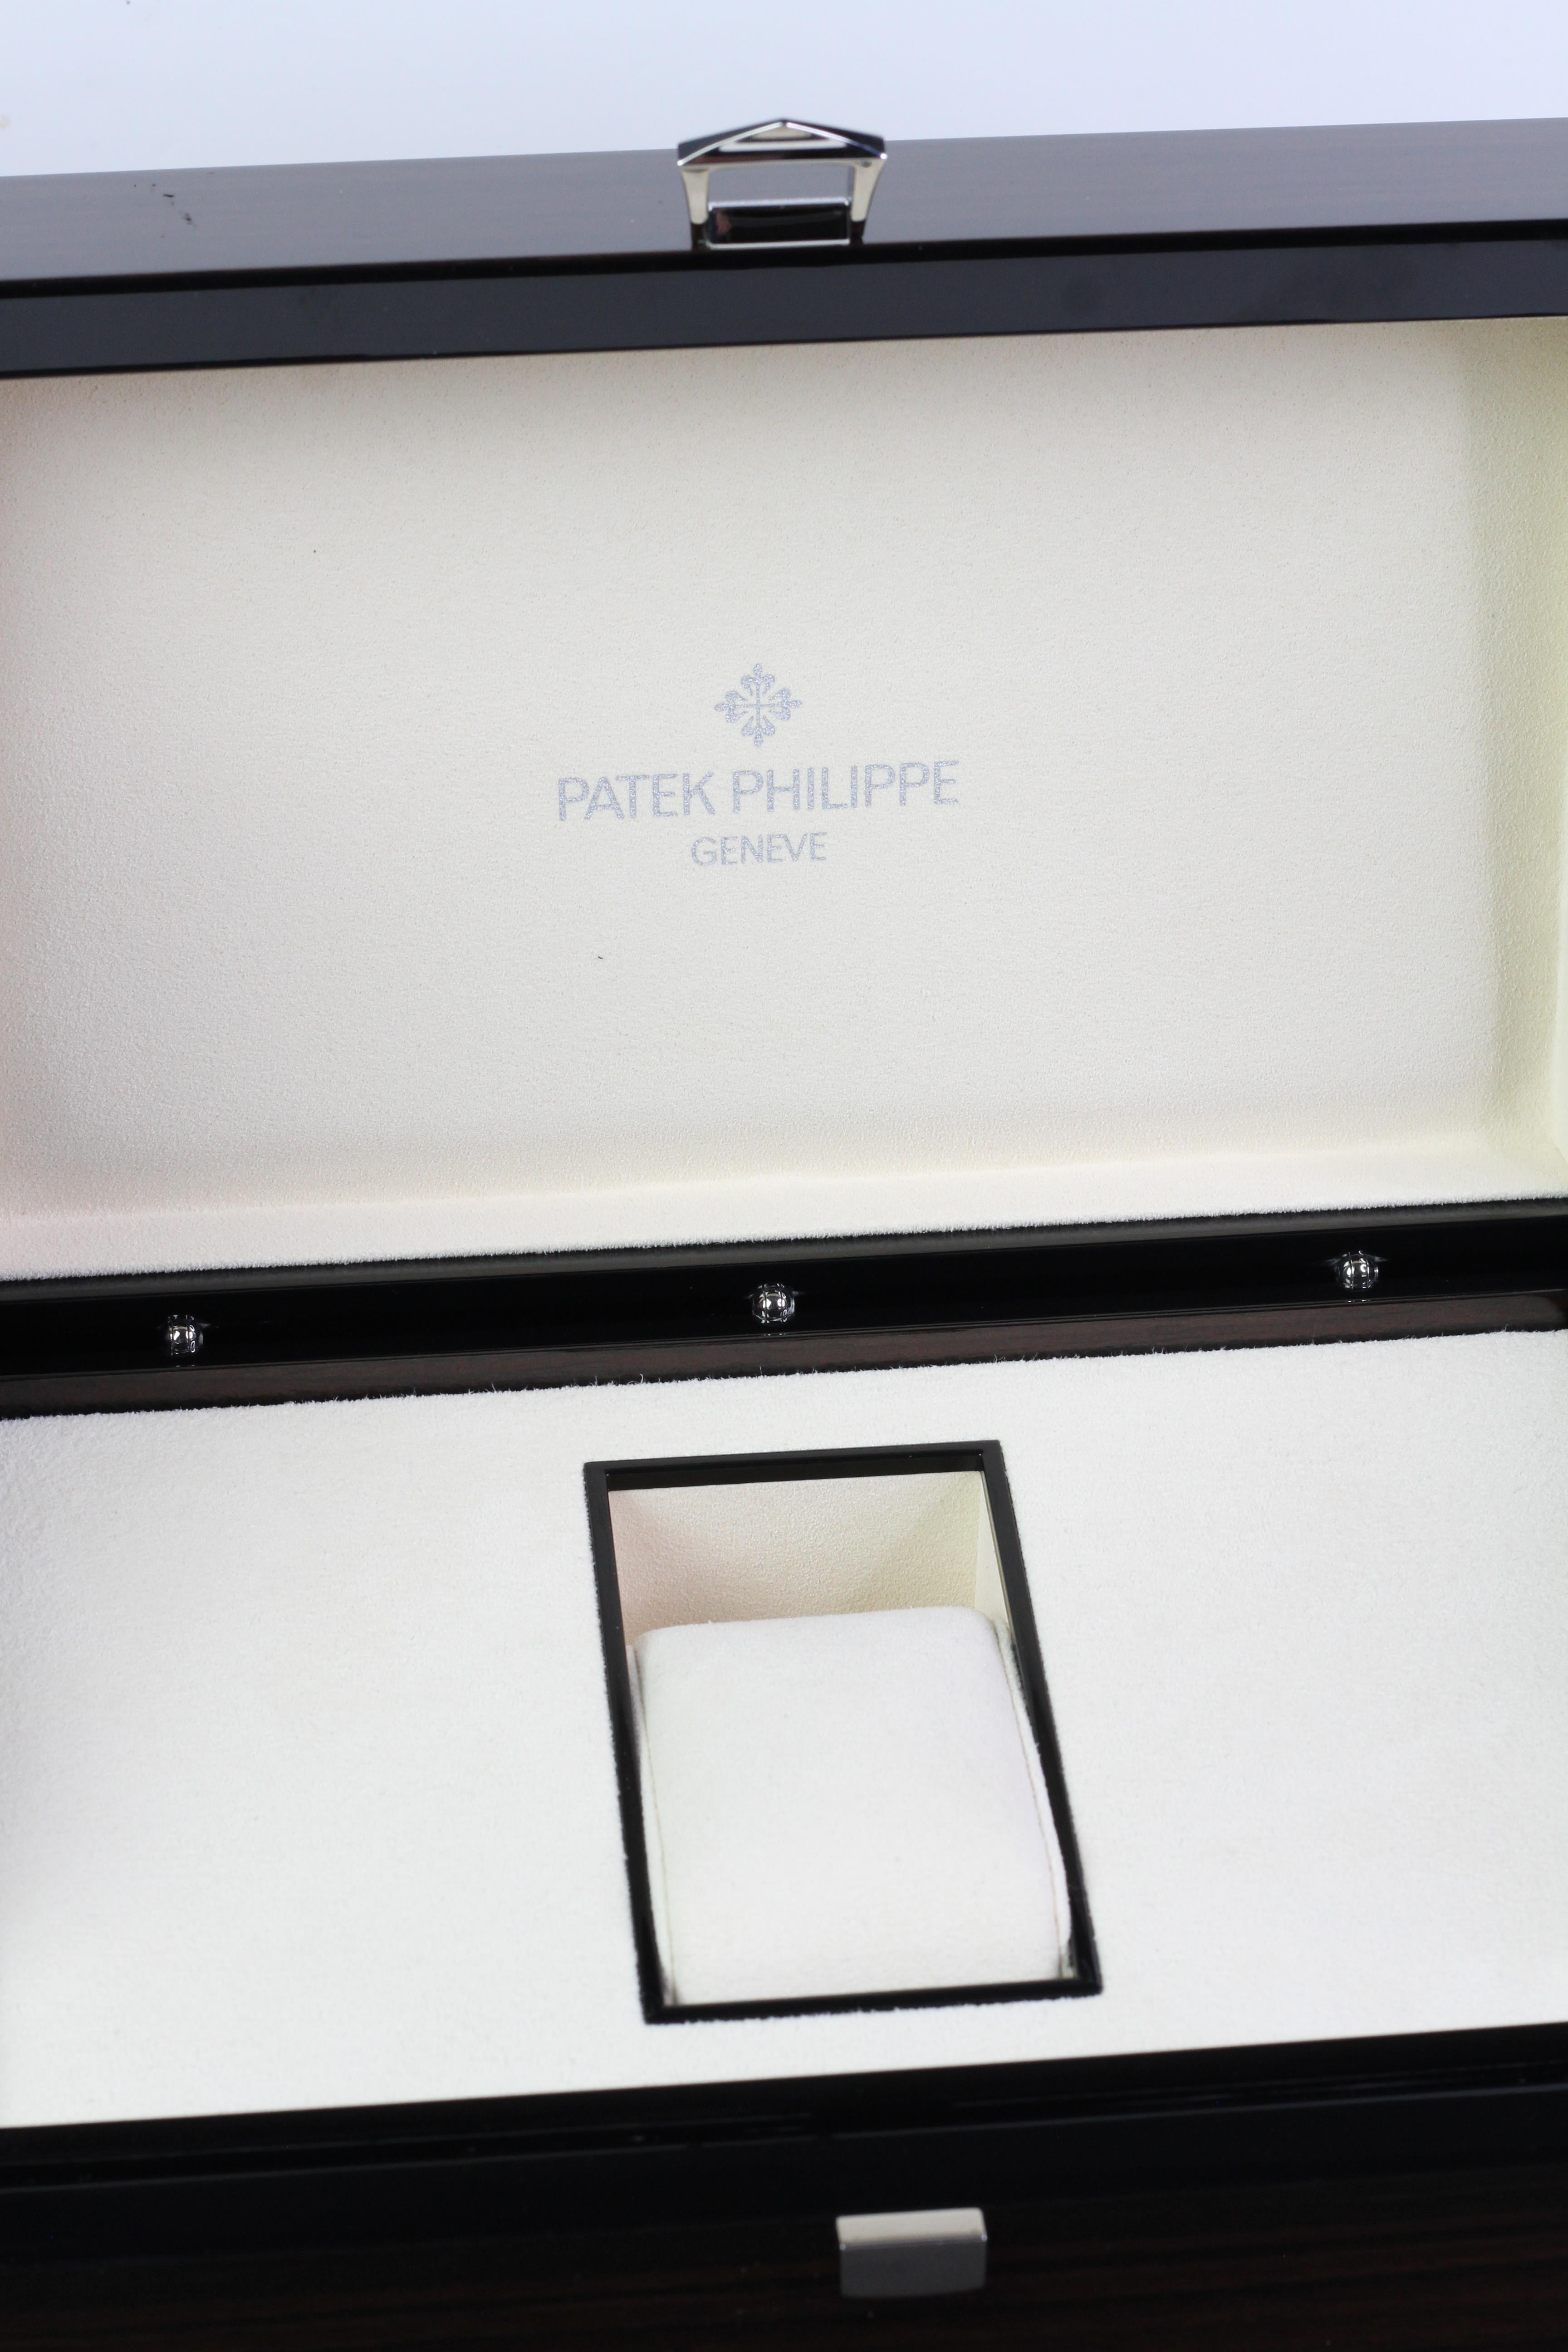 *To Be Sold Without Reserve* Modern Patek Philippe inner box and outer box - Image 6 of 6